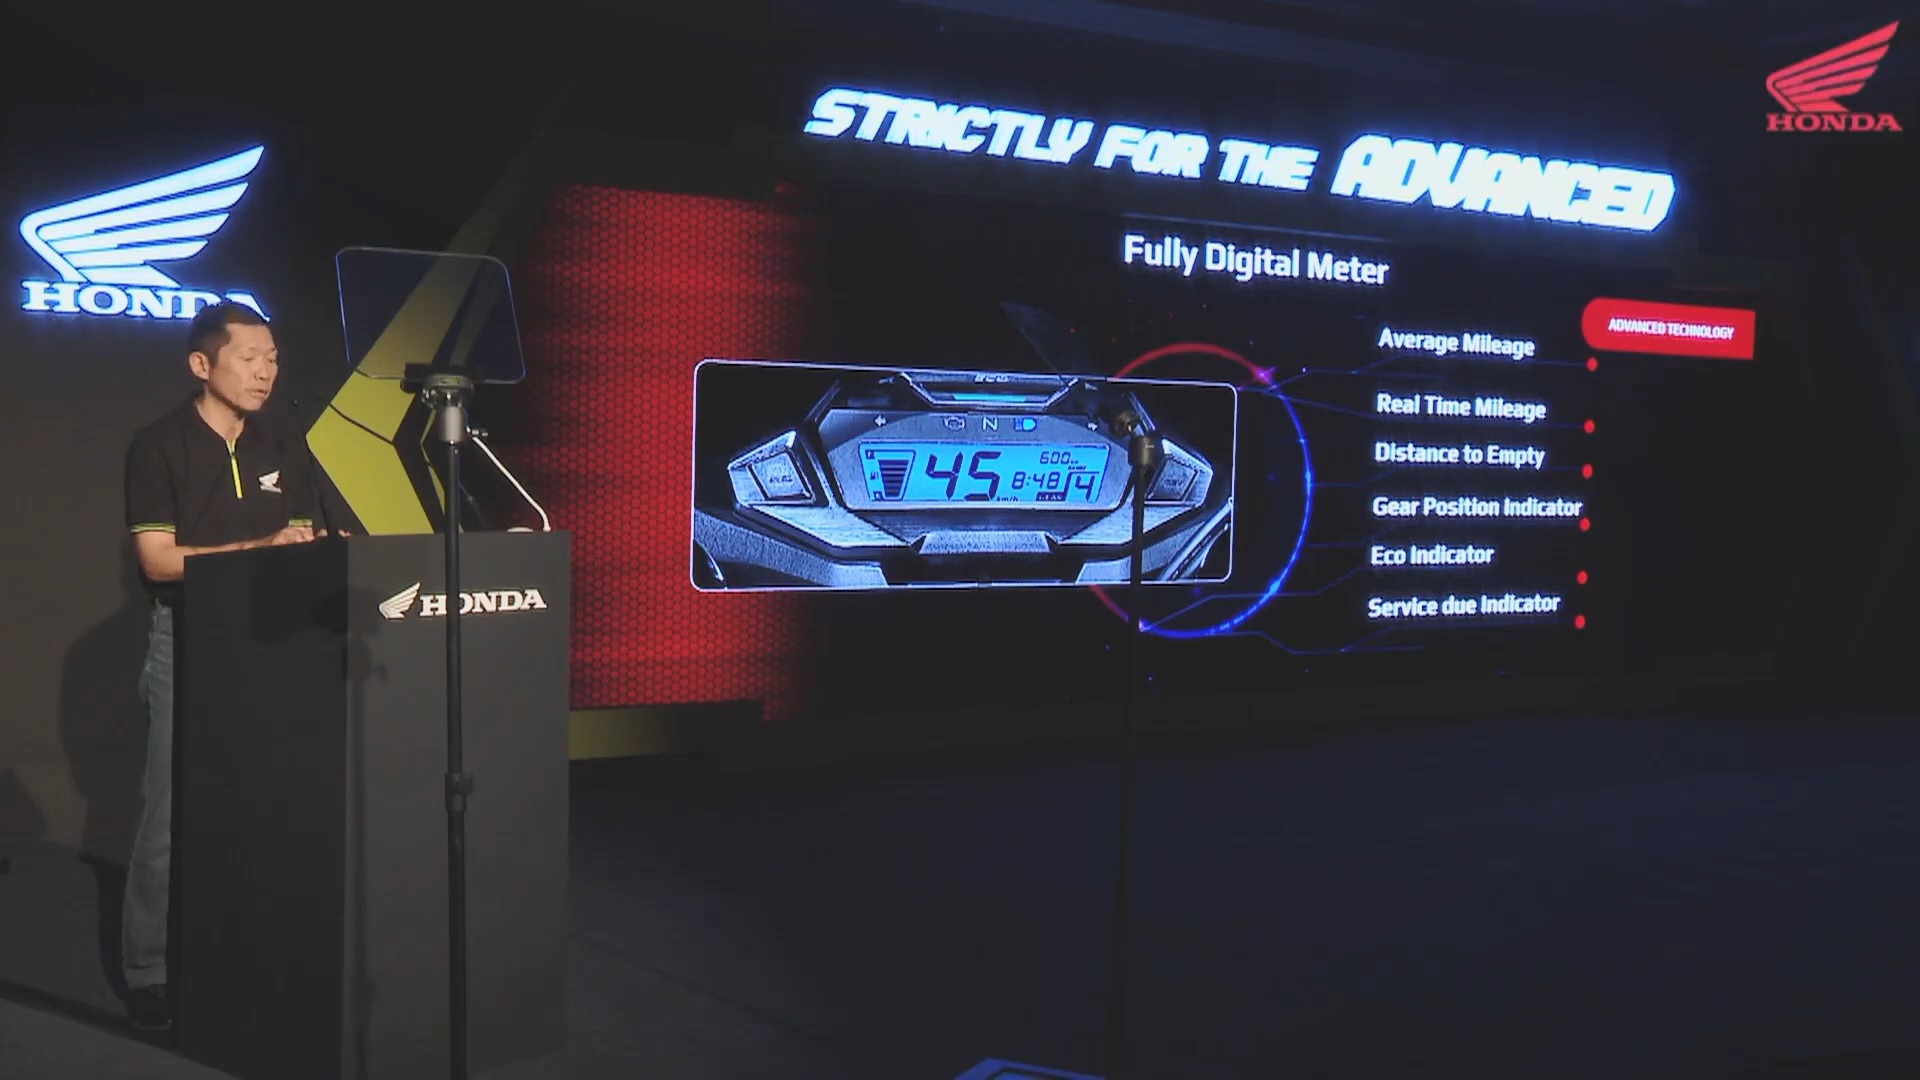 <p>The all-digital instrument cluster shows average mileage, realtime mileage, distance to empty,&nbsp; gear position indicator, and service due indicator. Which is a first-in-segment feature.</p>

